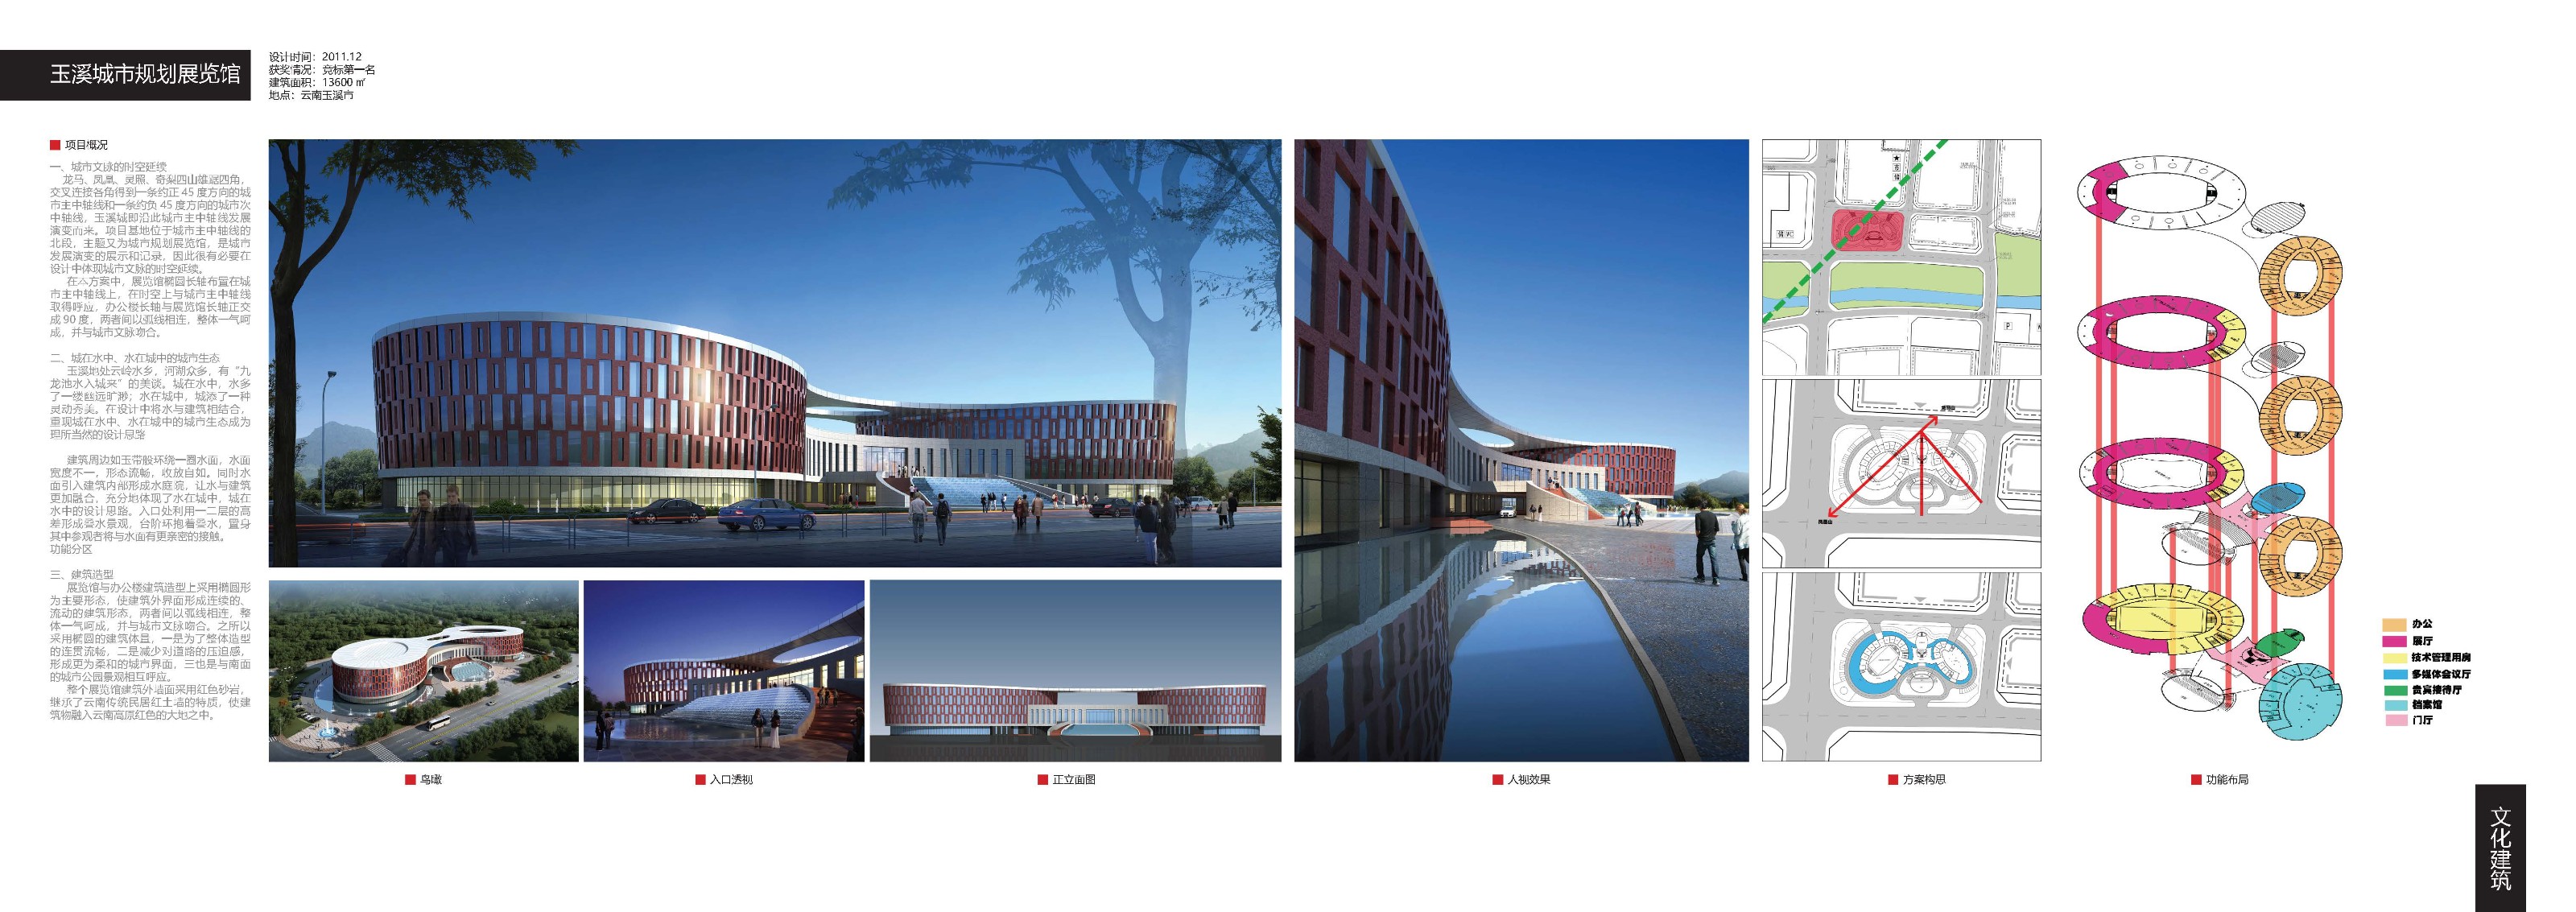 2011-2021-Architecture-Projects_页面_14.jpg